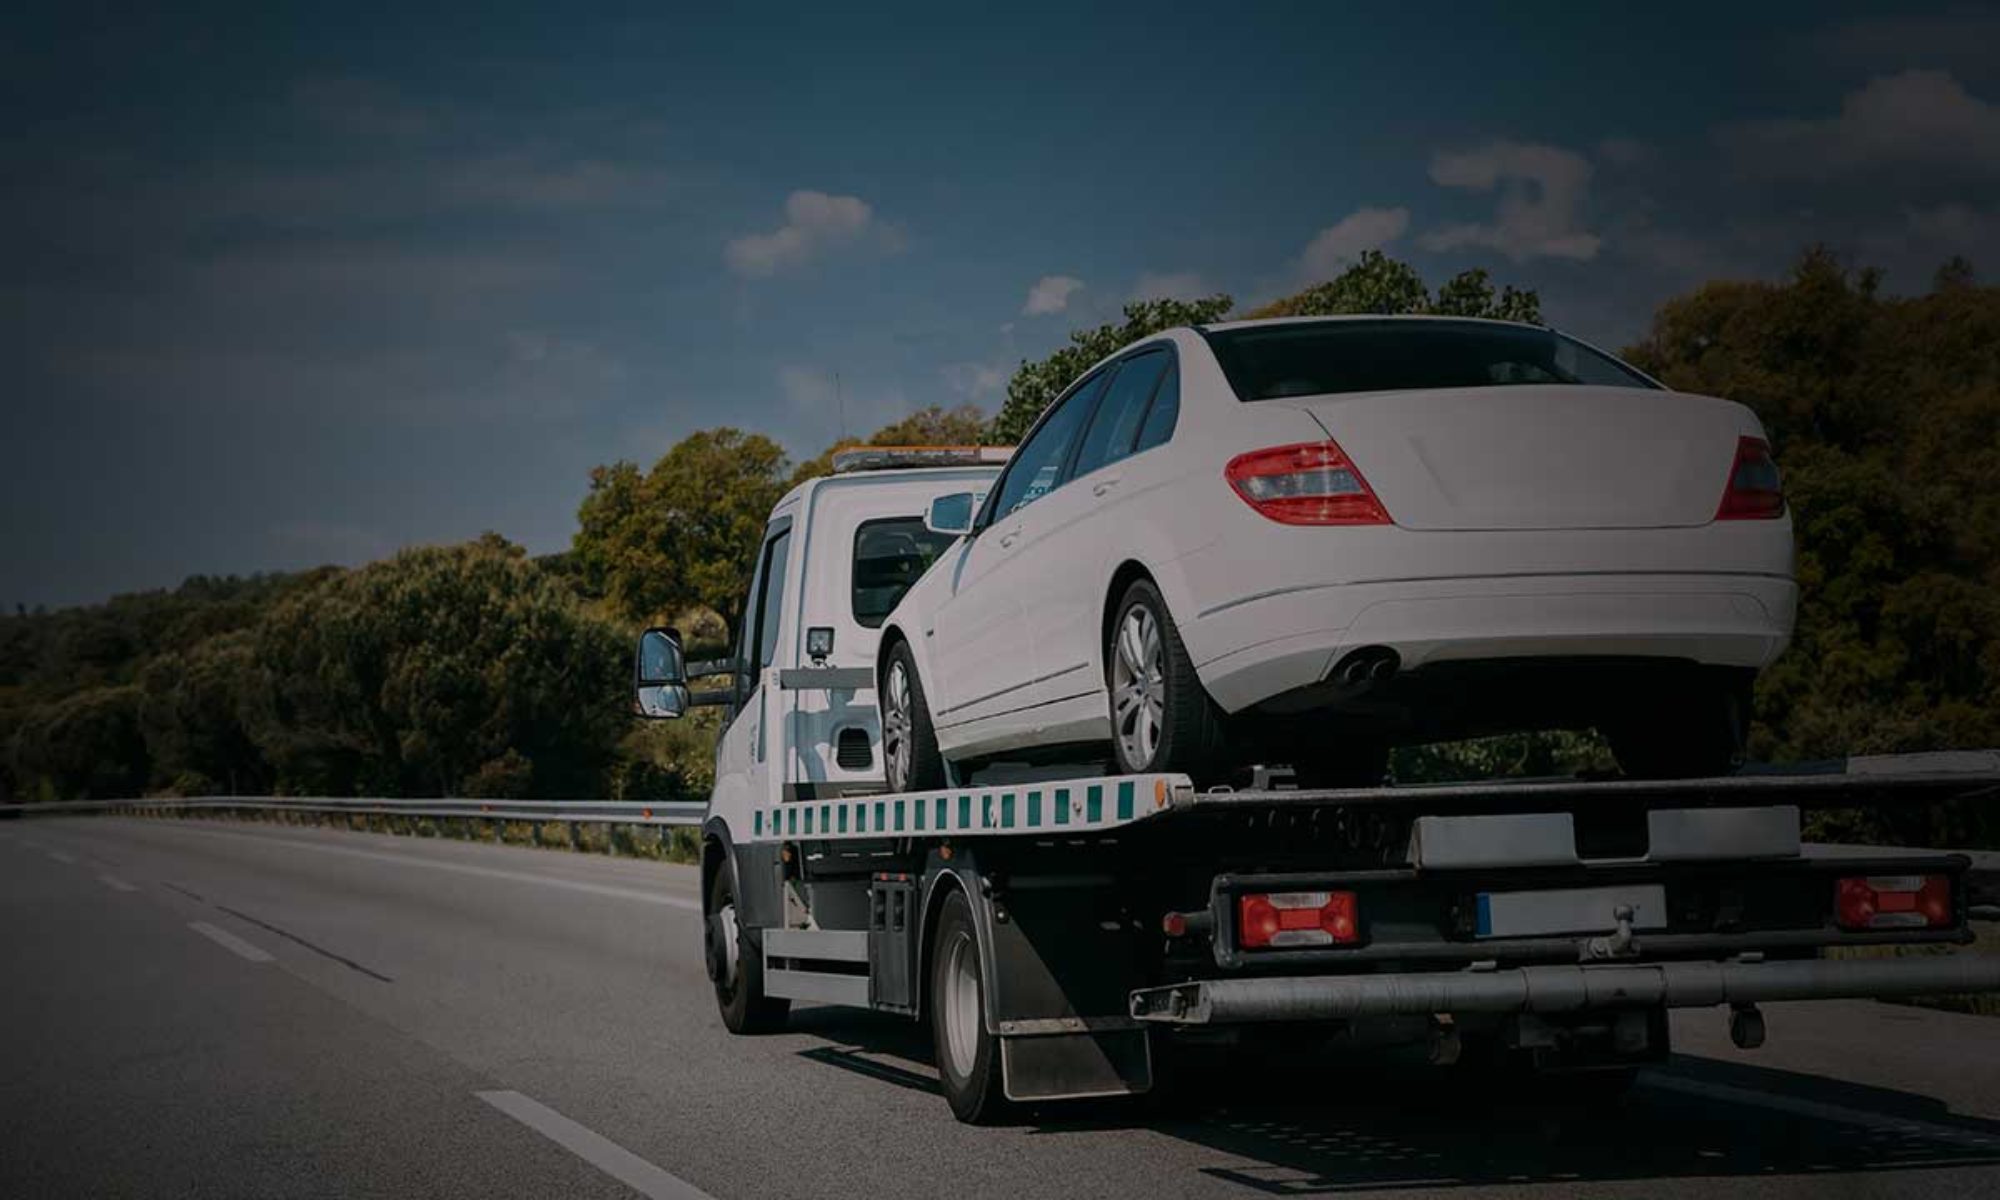 24/7 Alexandria Towing - ACE Towing